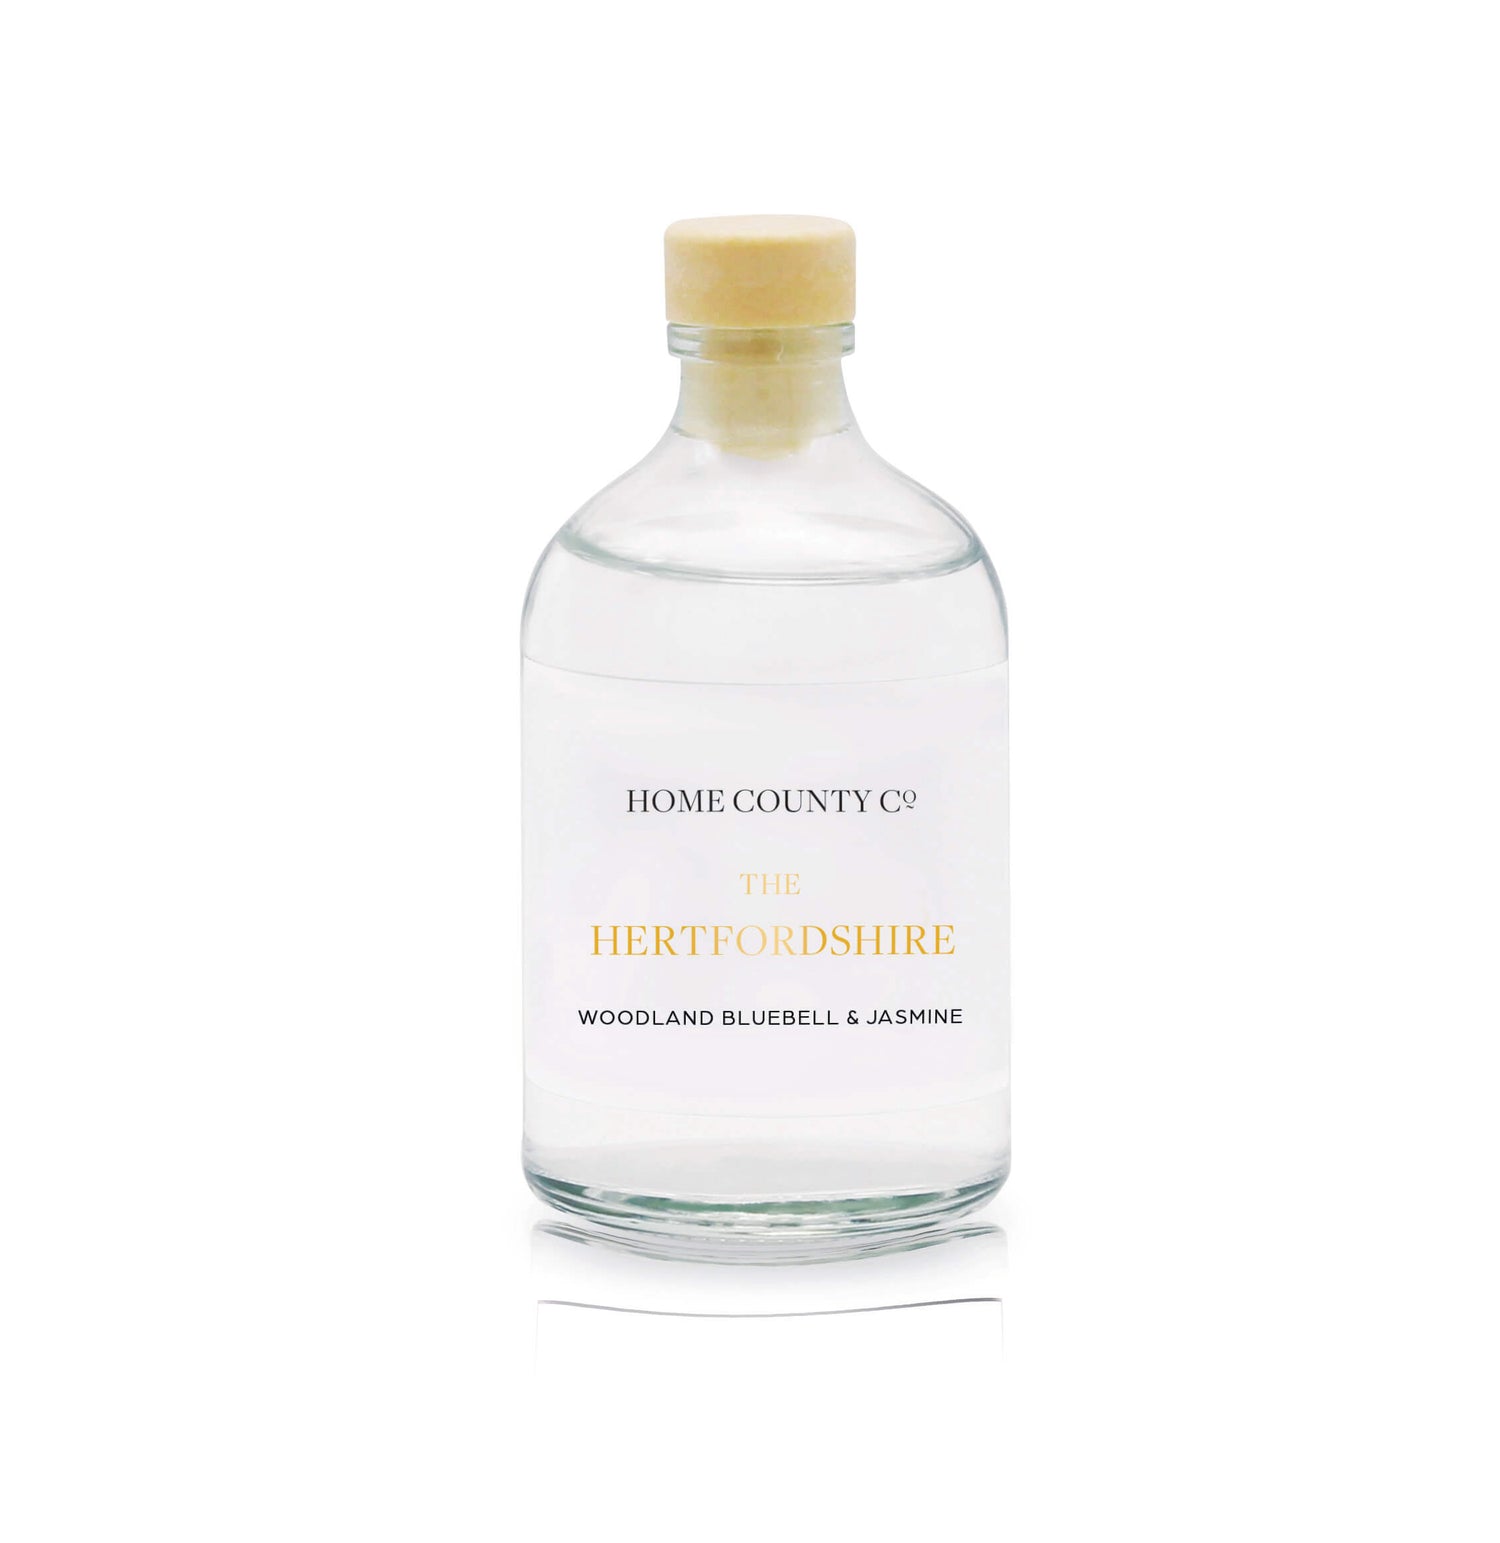 A woodland bluebell and jasmine reed diffuser refill is shown in a recyclable glass bottle